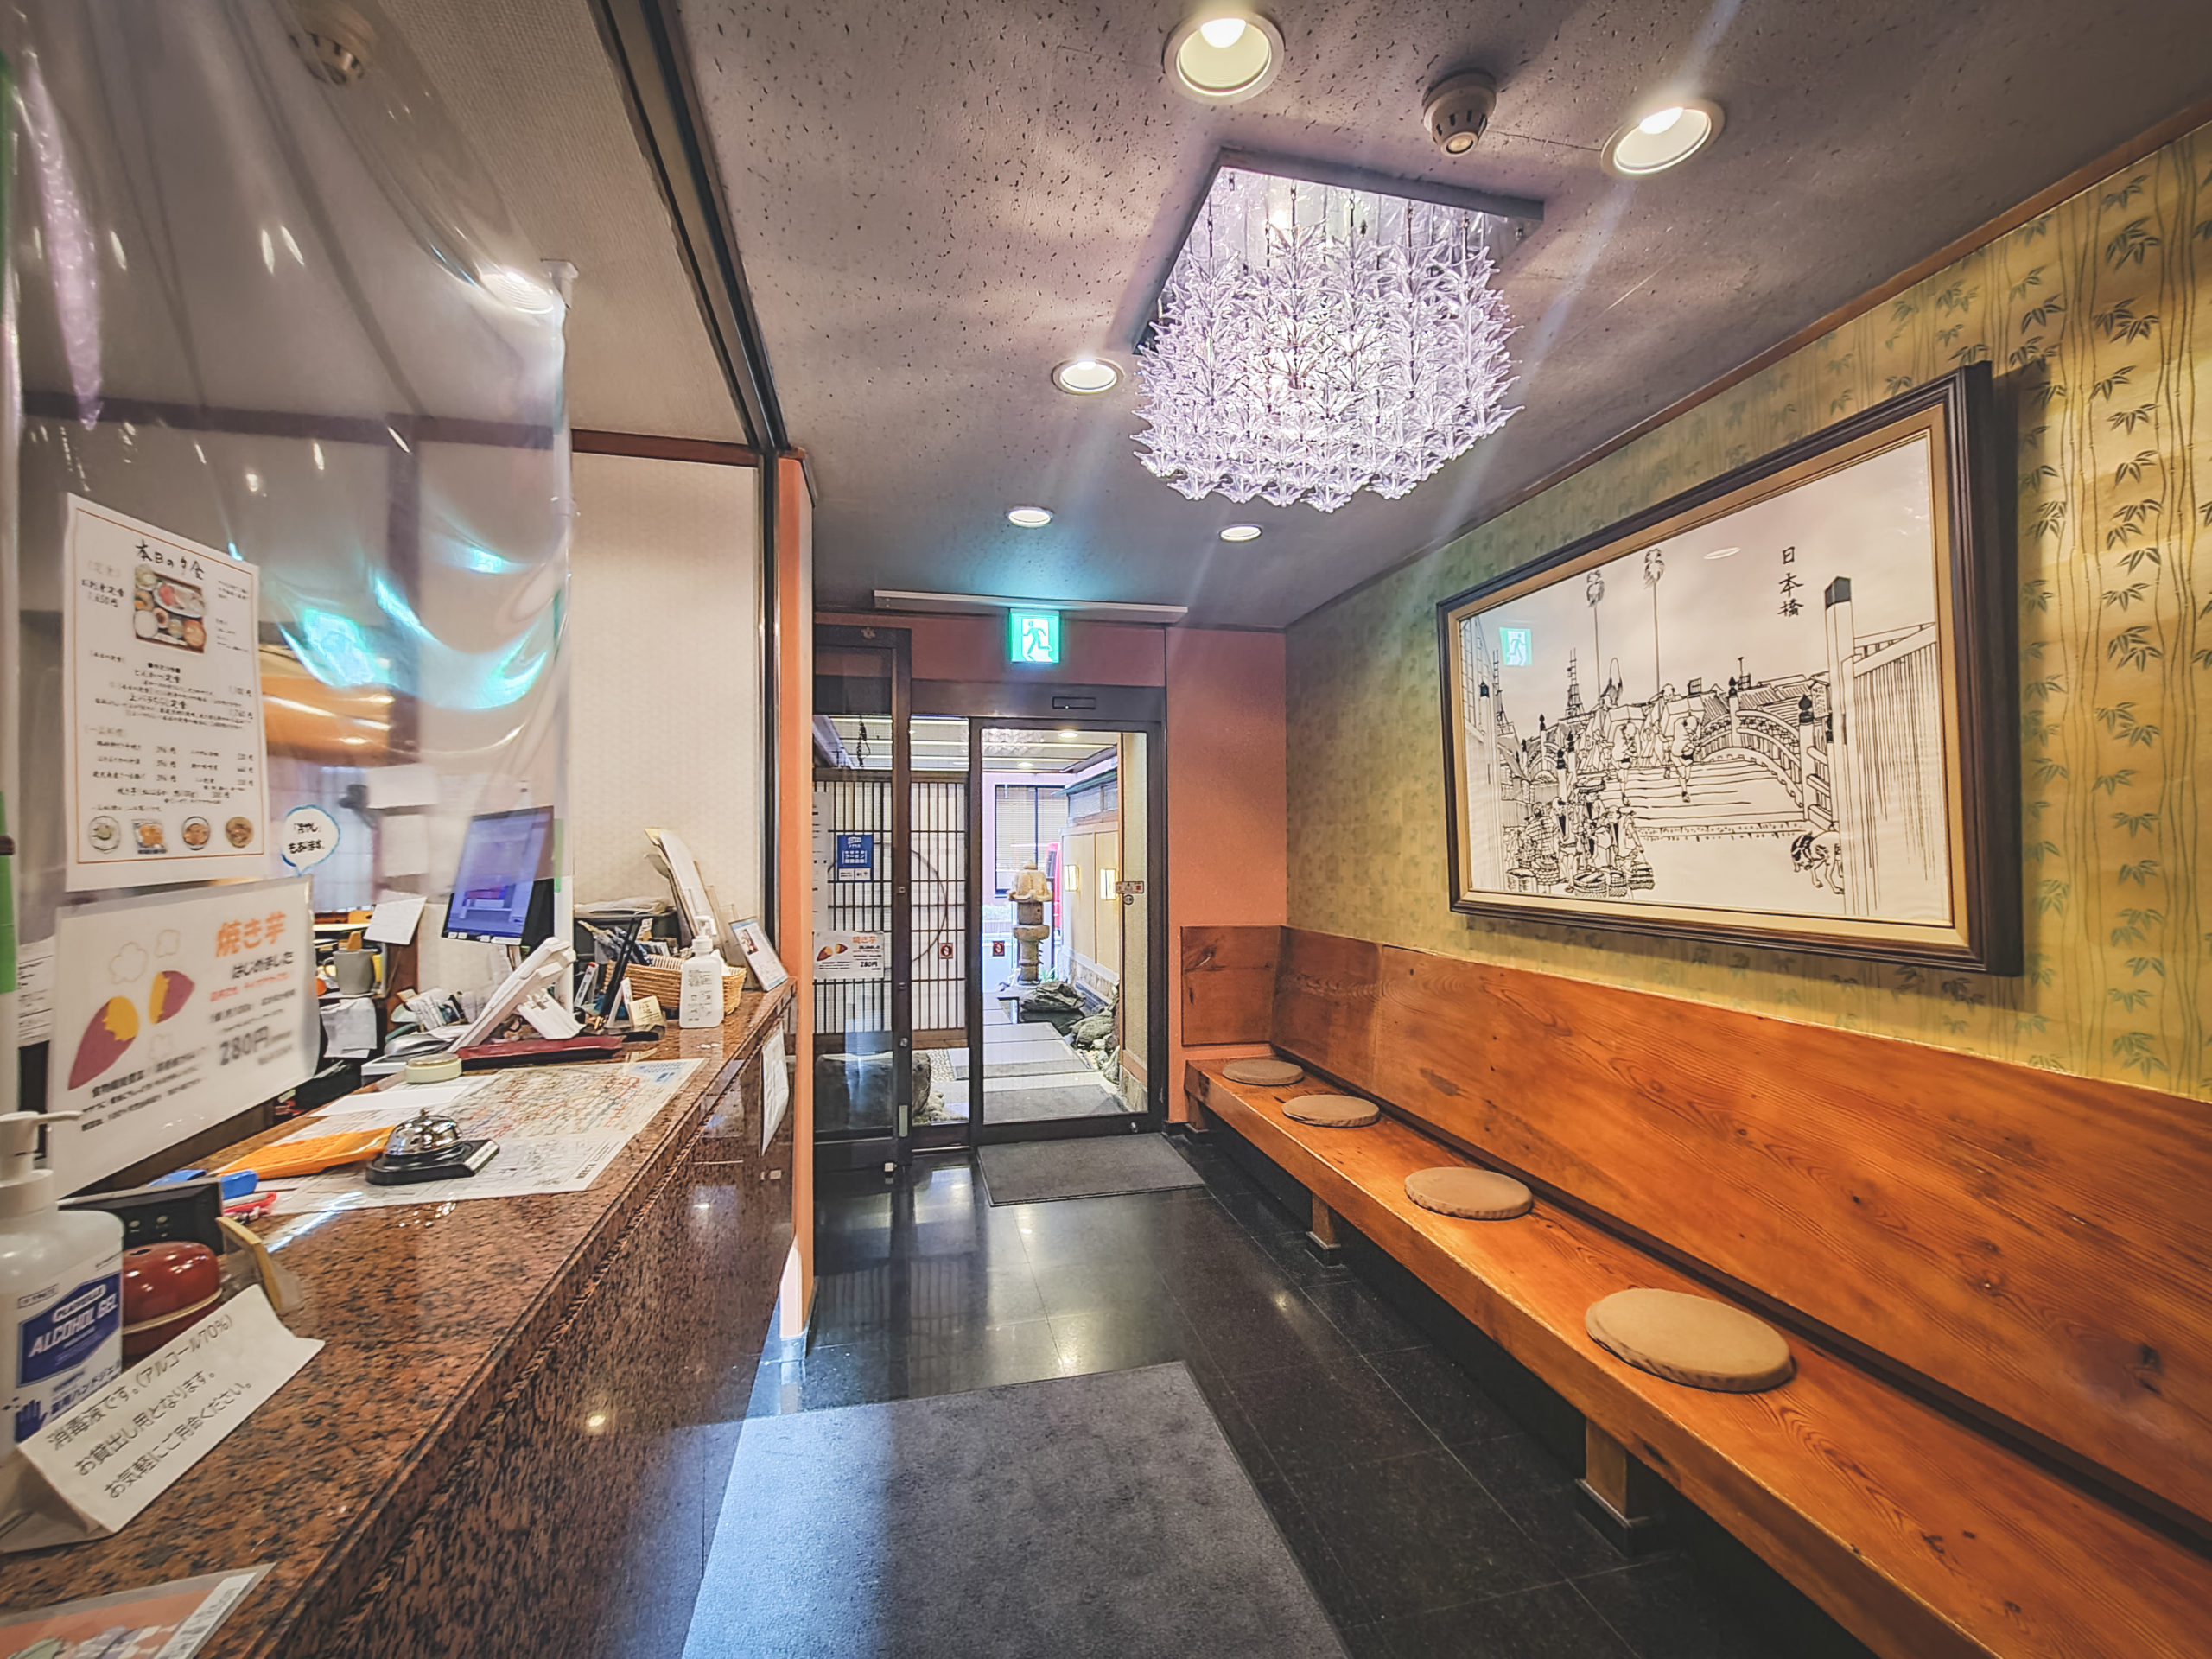 The lobby: a combination of retro western taste and traditional Japan